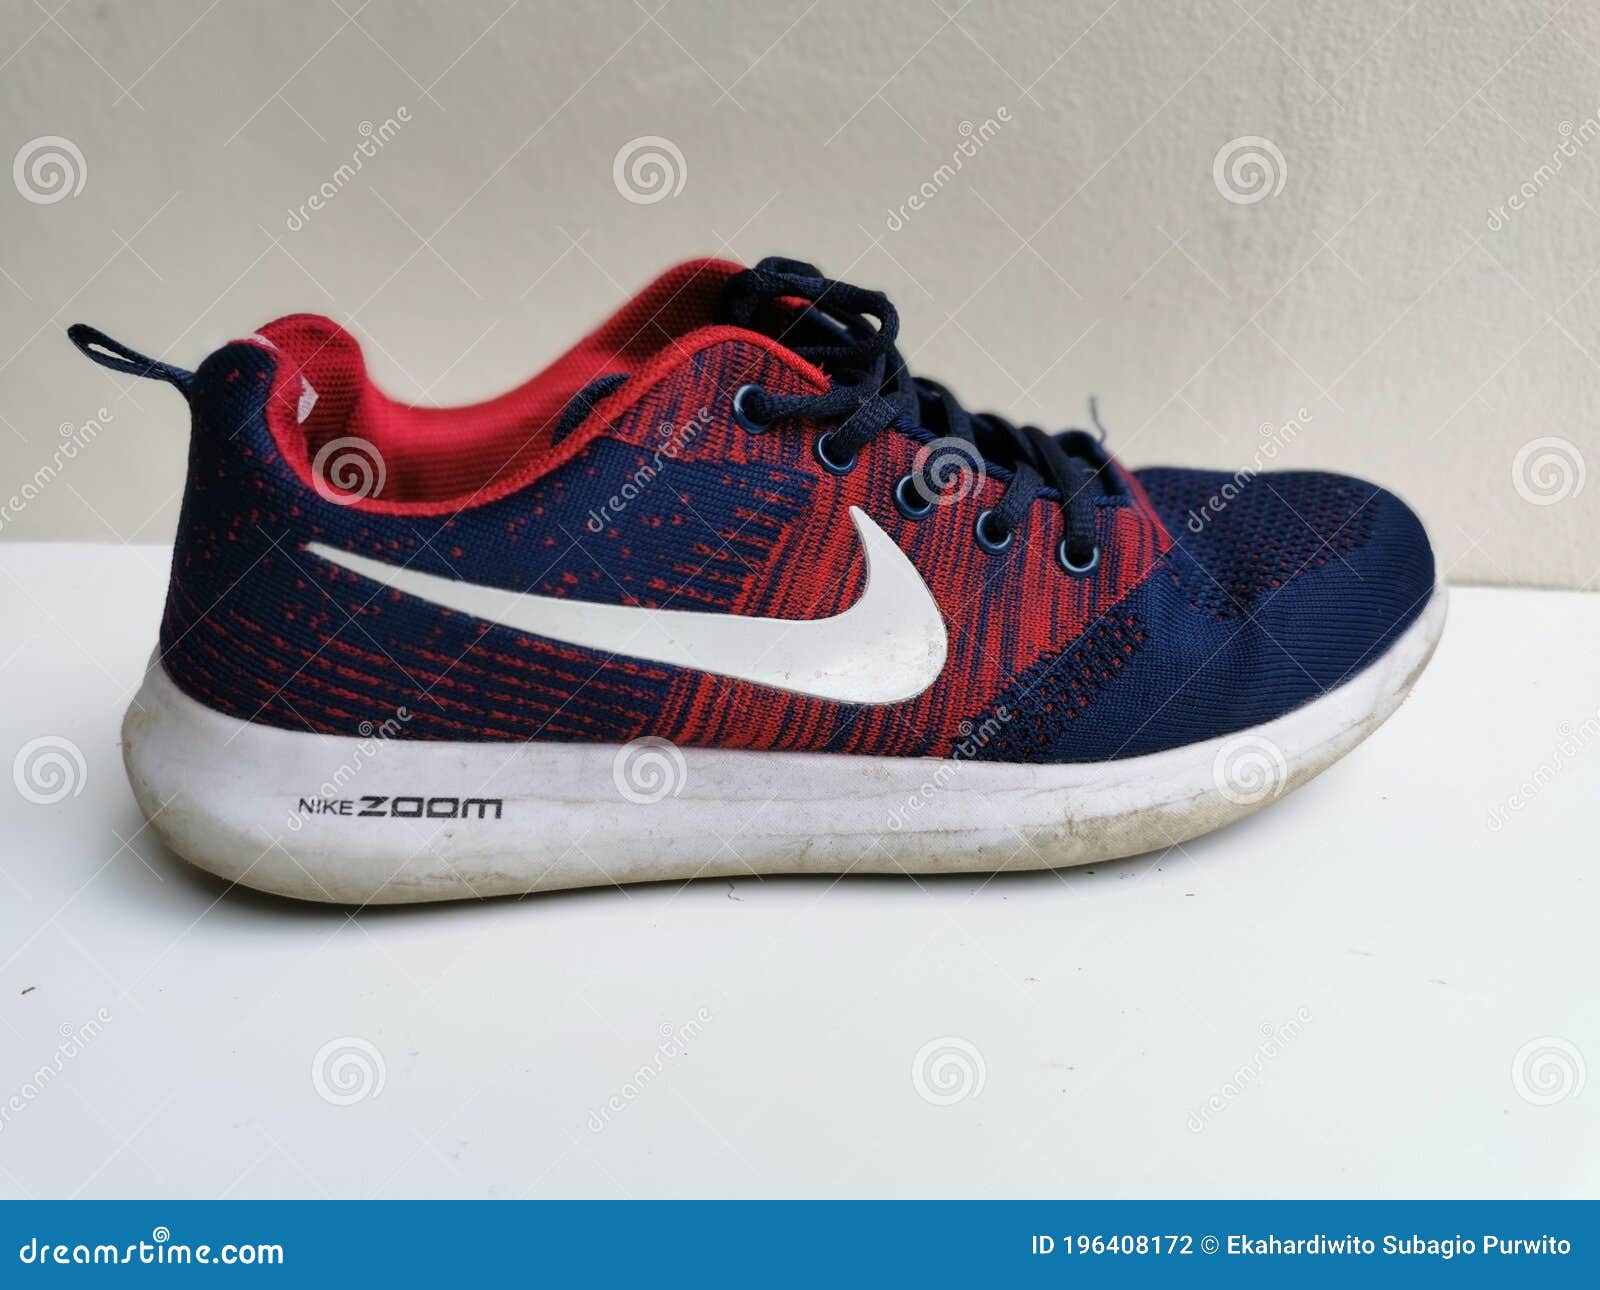 Image Of Used Running Shoe By Nike 